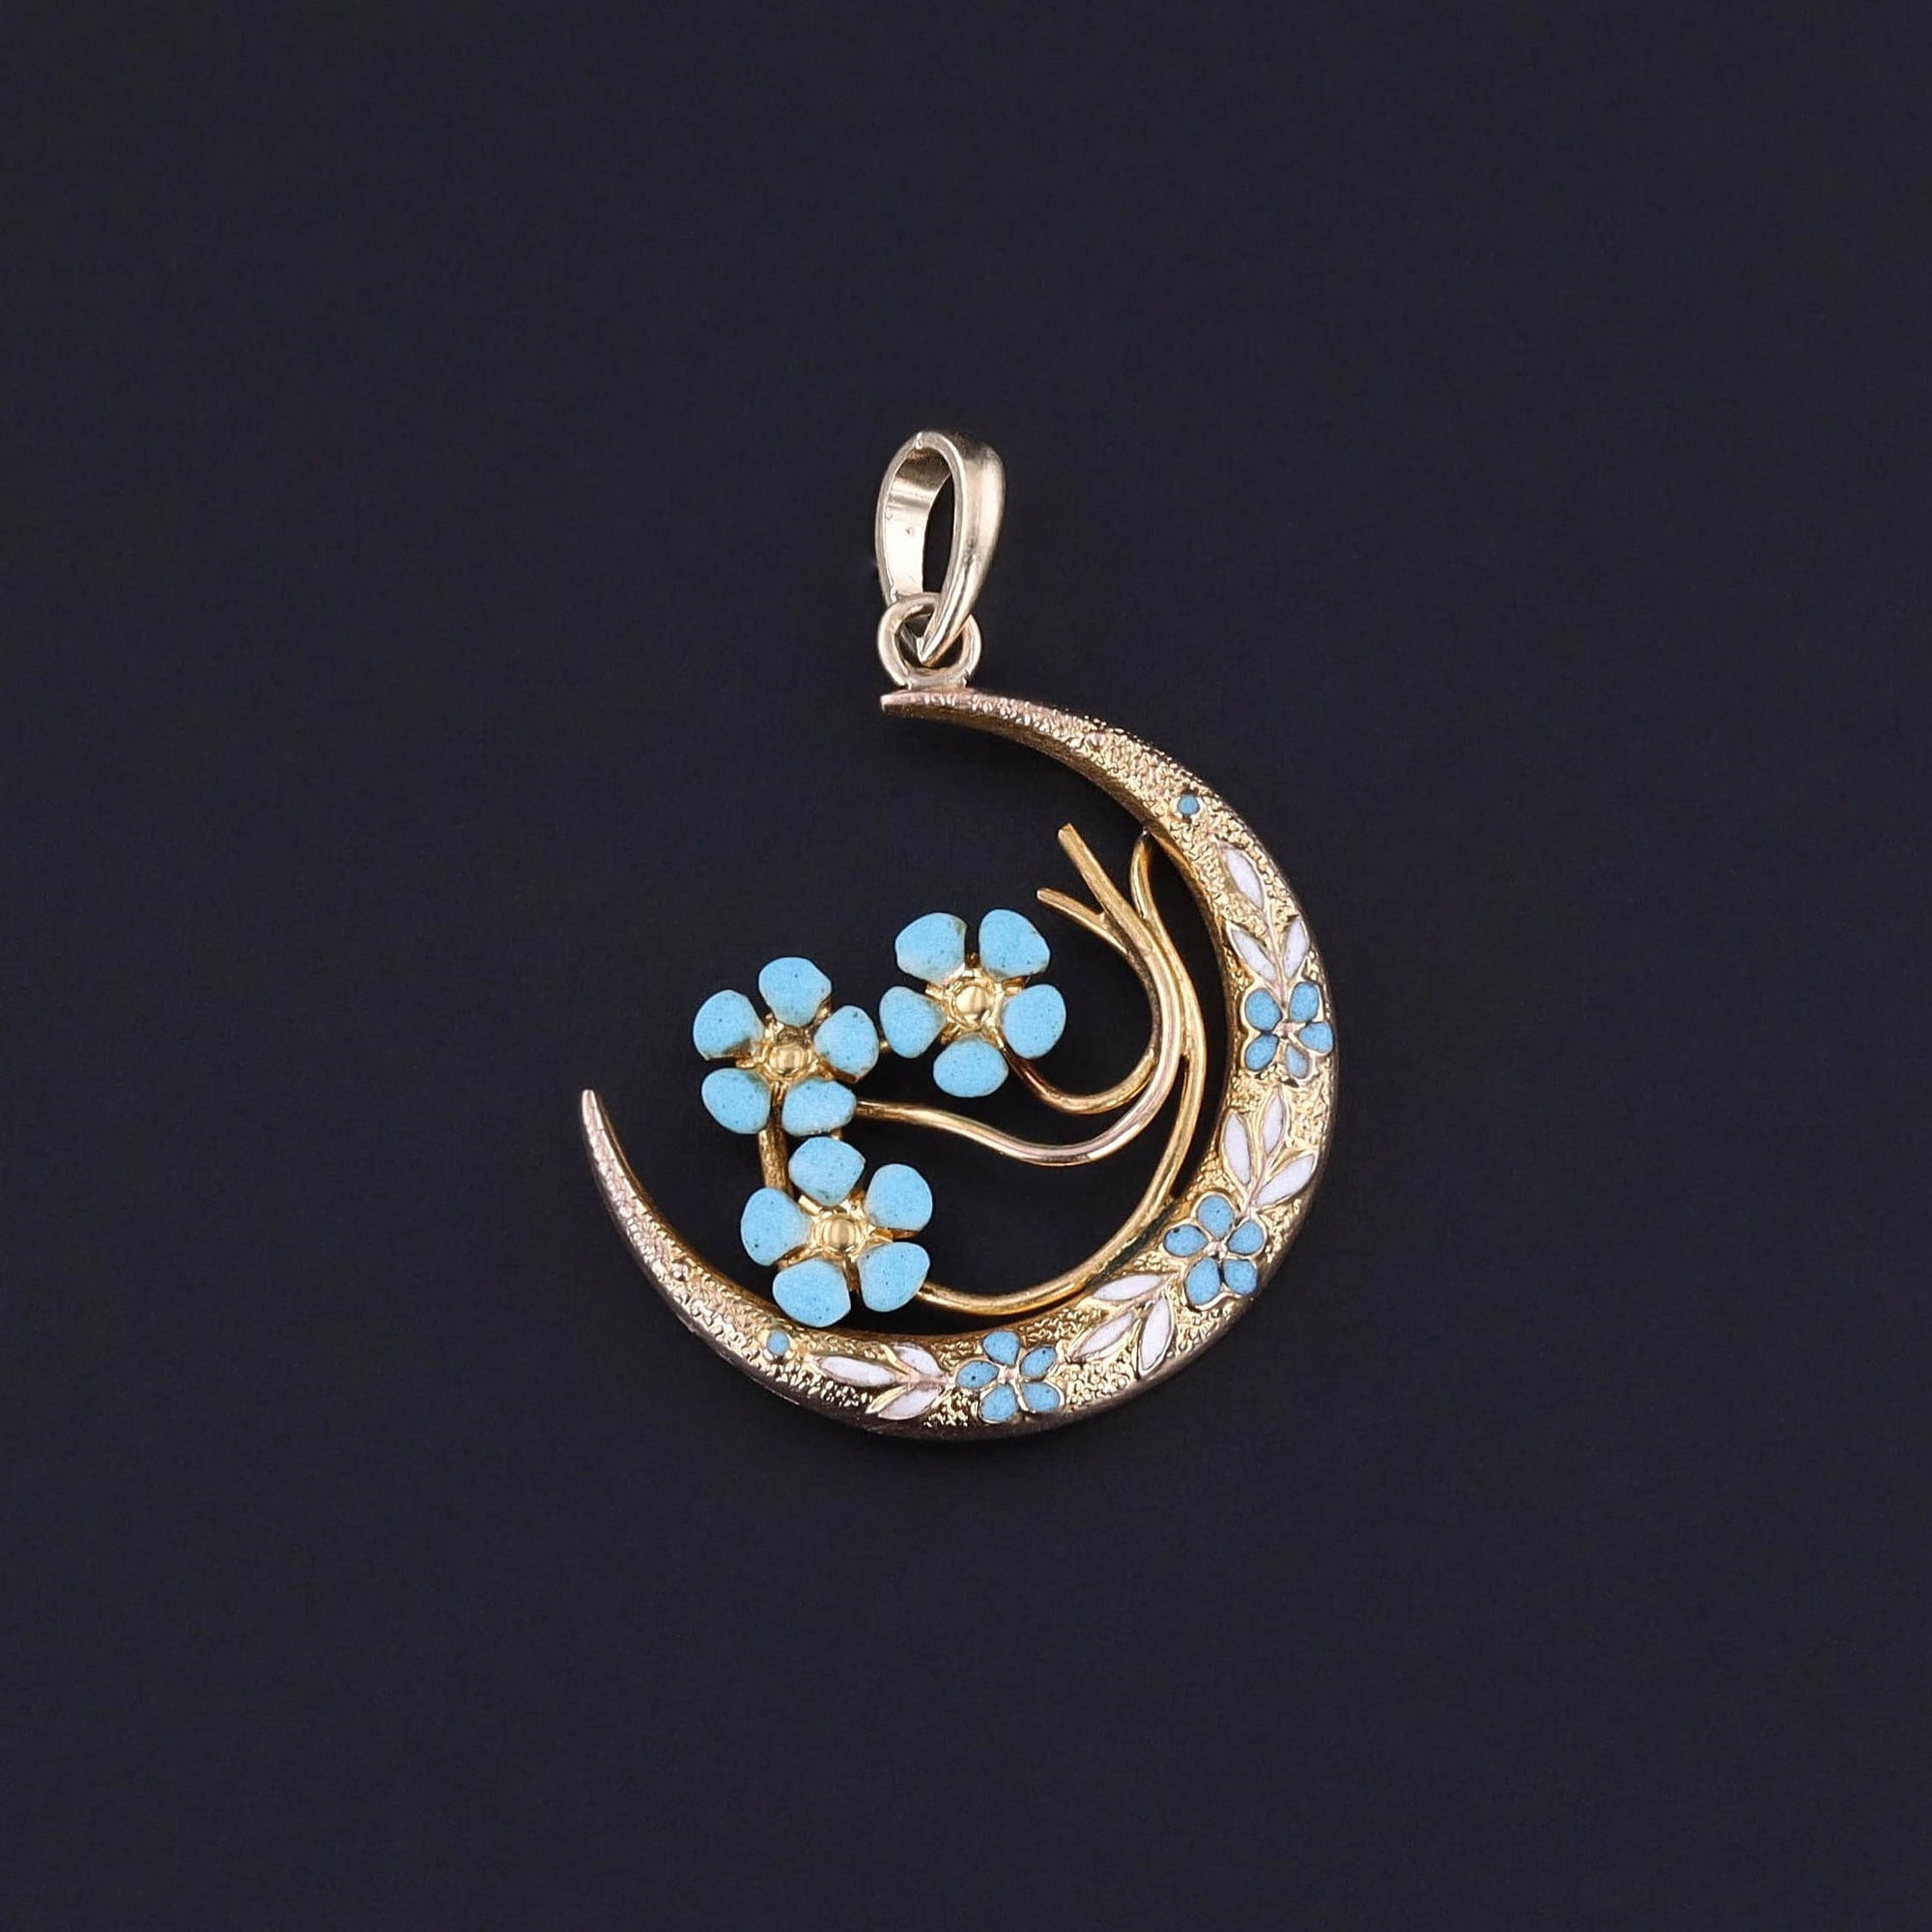 An antique enamel forget-me-not flower crescent moon pendant created from an antique pin. The 14k gold pendant is in great condition.